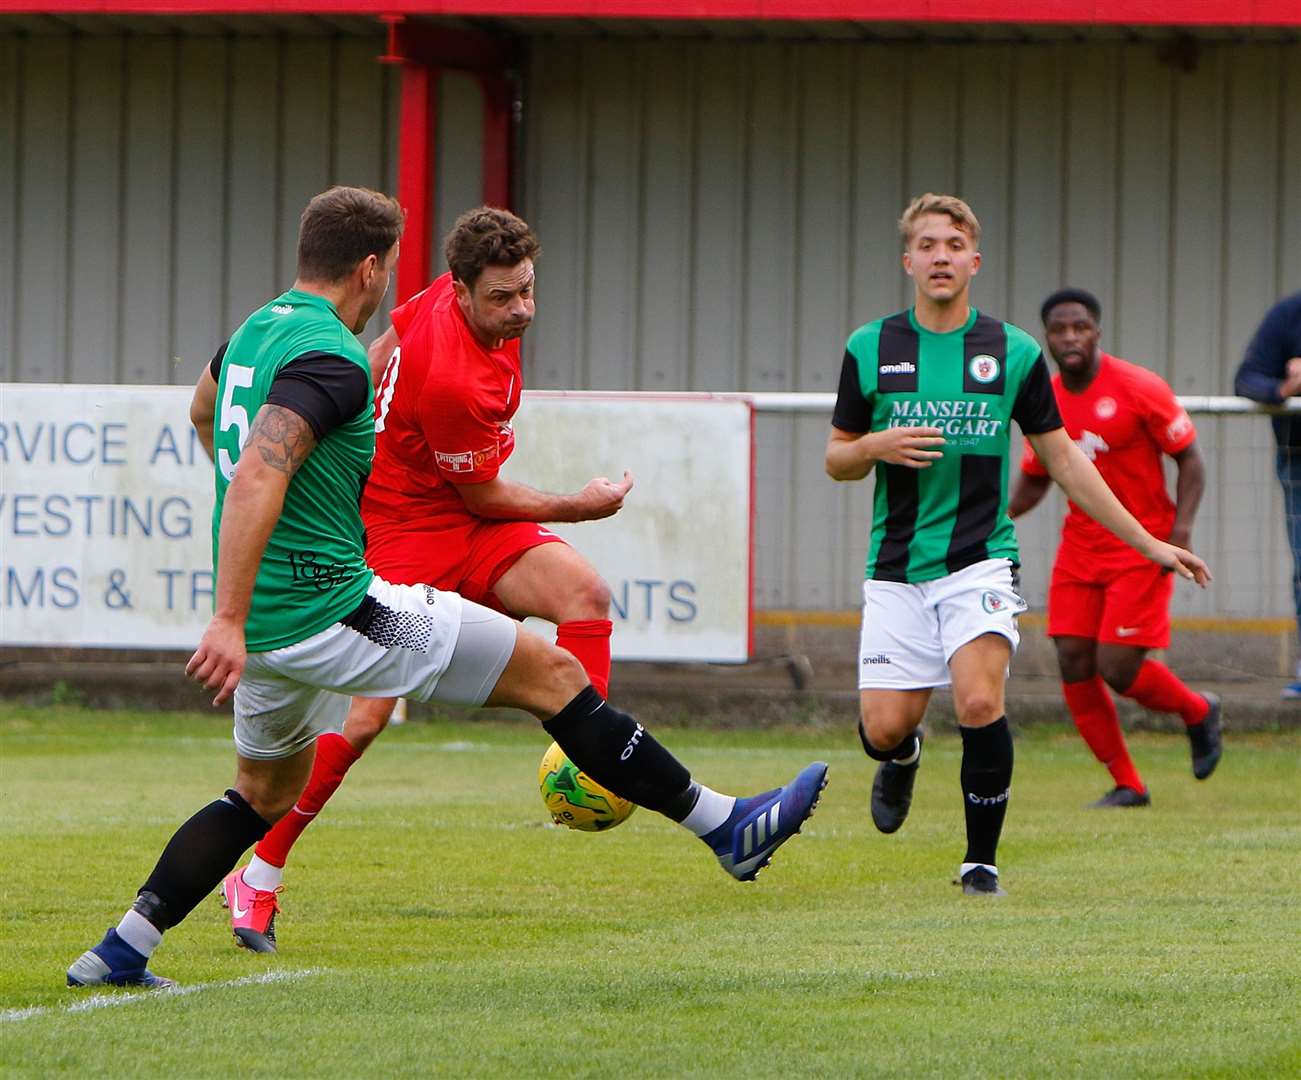 Player-coach Frannie Collin has left Hythe Picture: Barry Goodwin